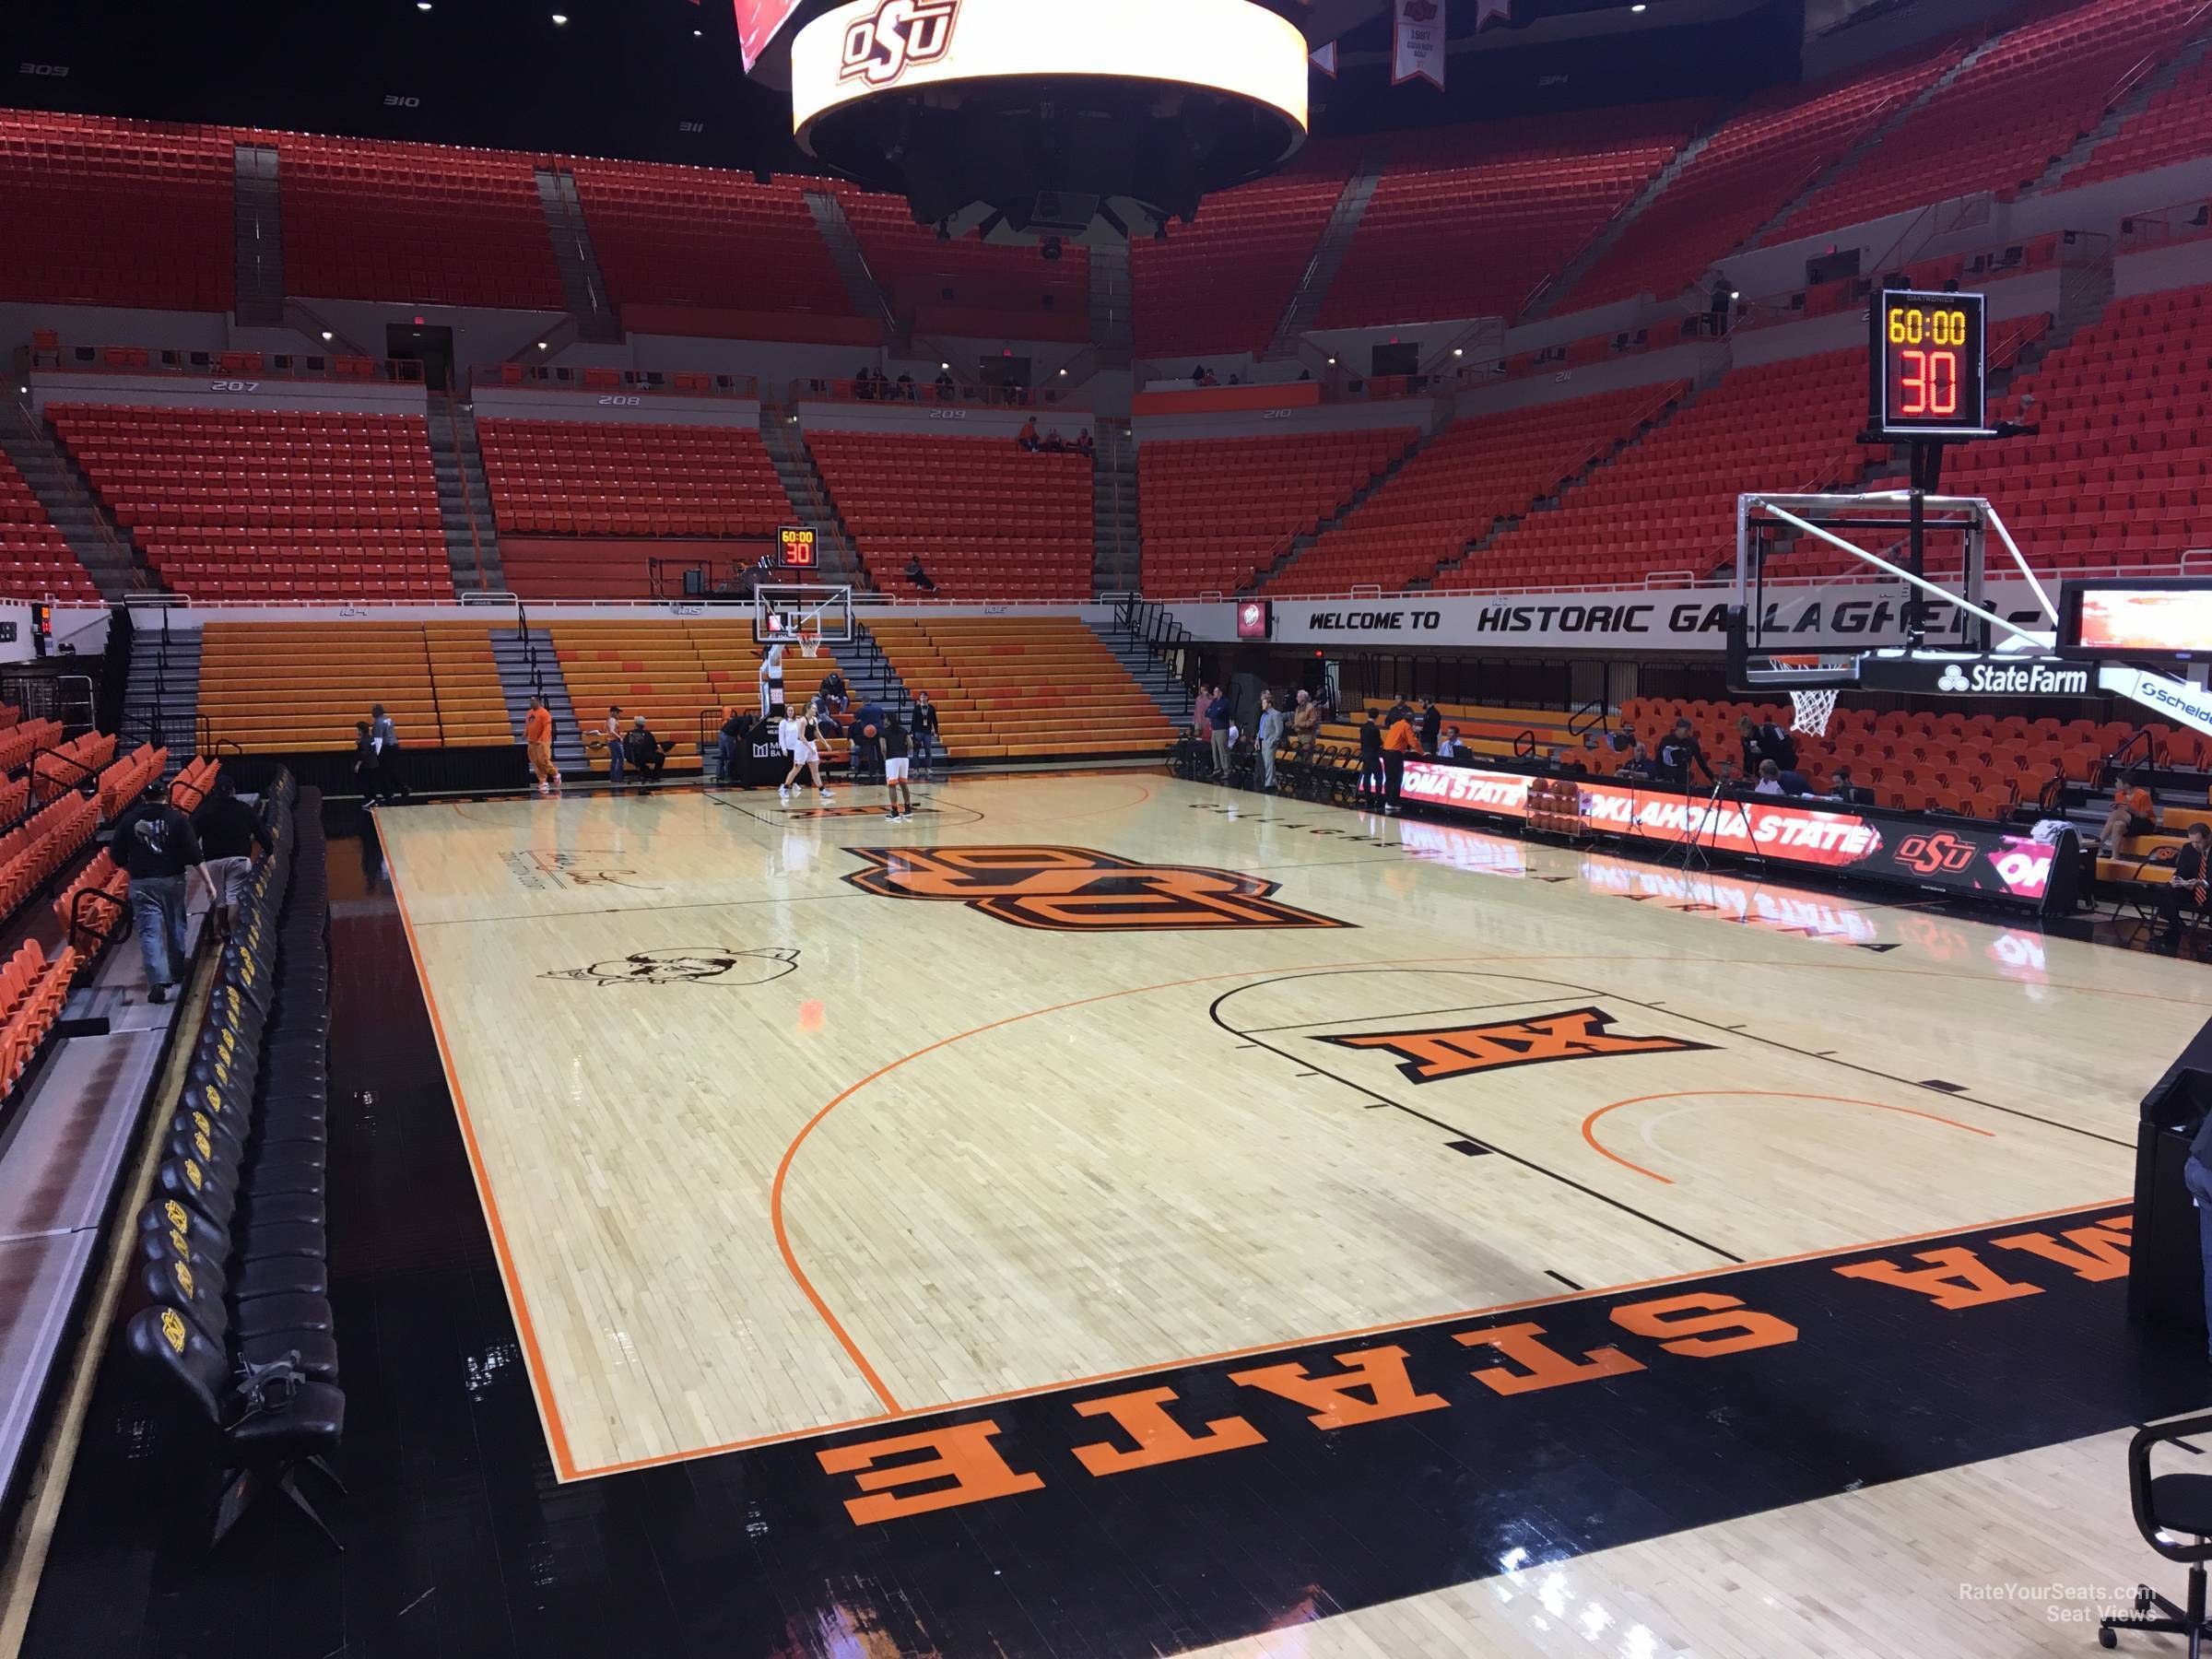 section 112, row 6 seat view  - gallagher-iba arena